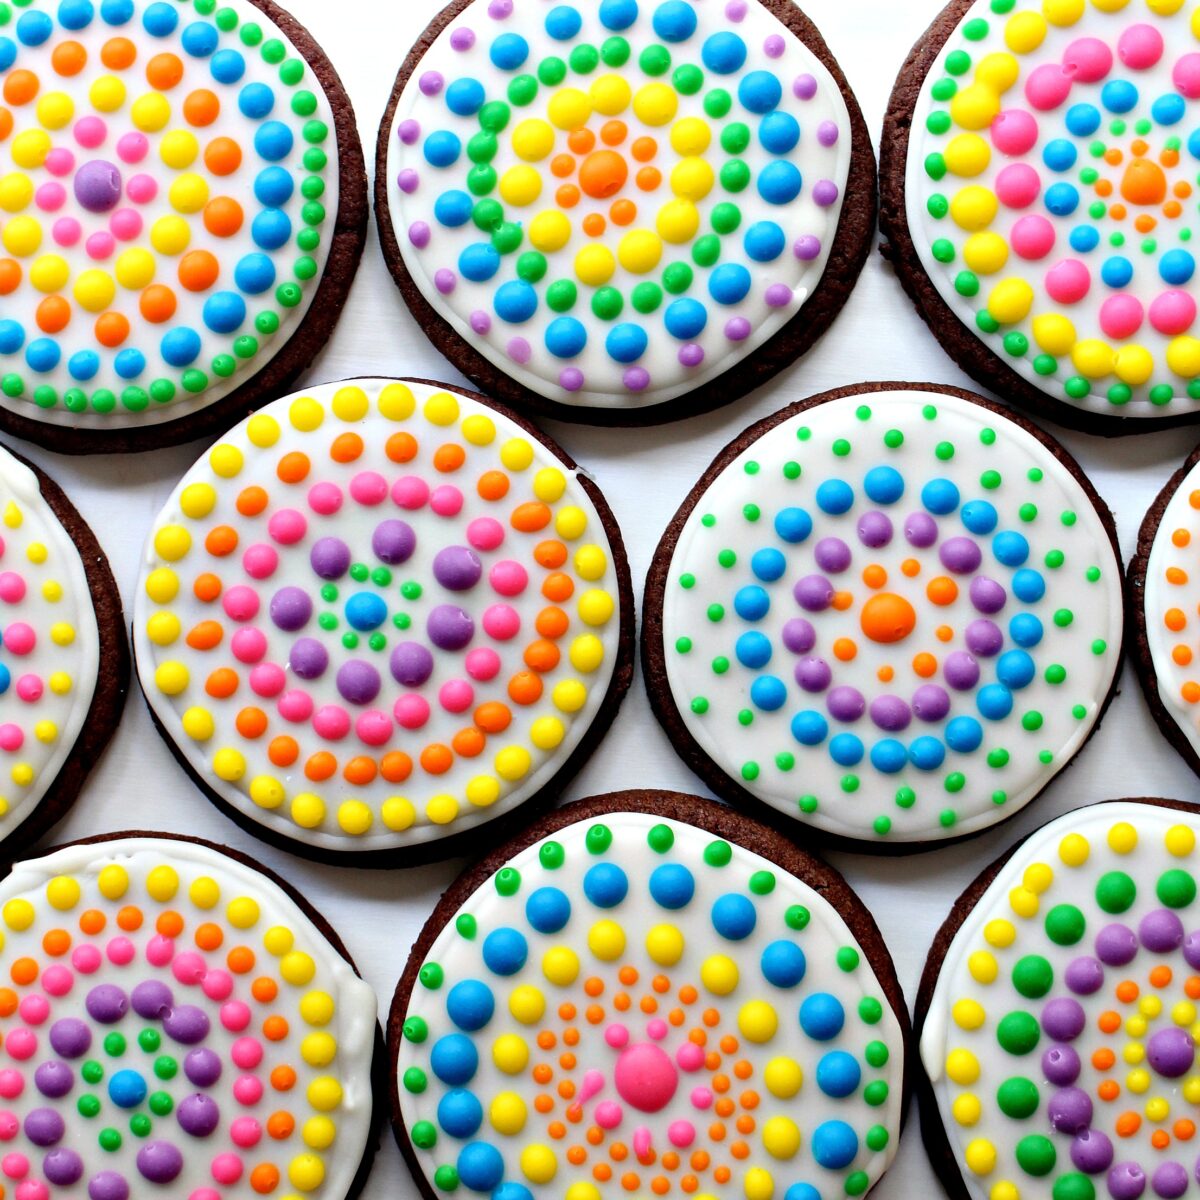 Dia de los Muertos Sugar Cookies with white icing, and circles of colorful icing dots.